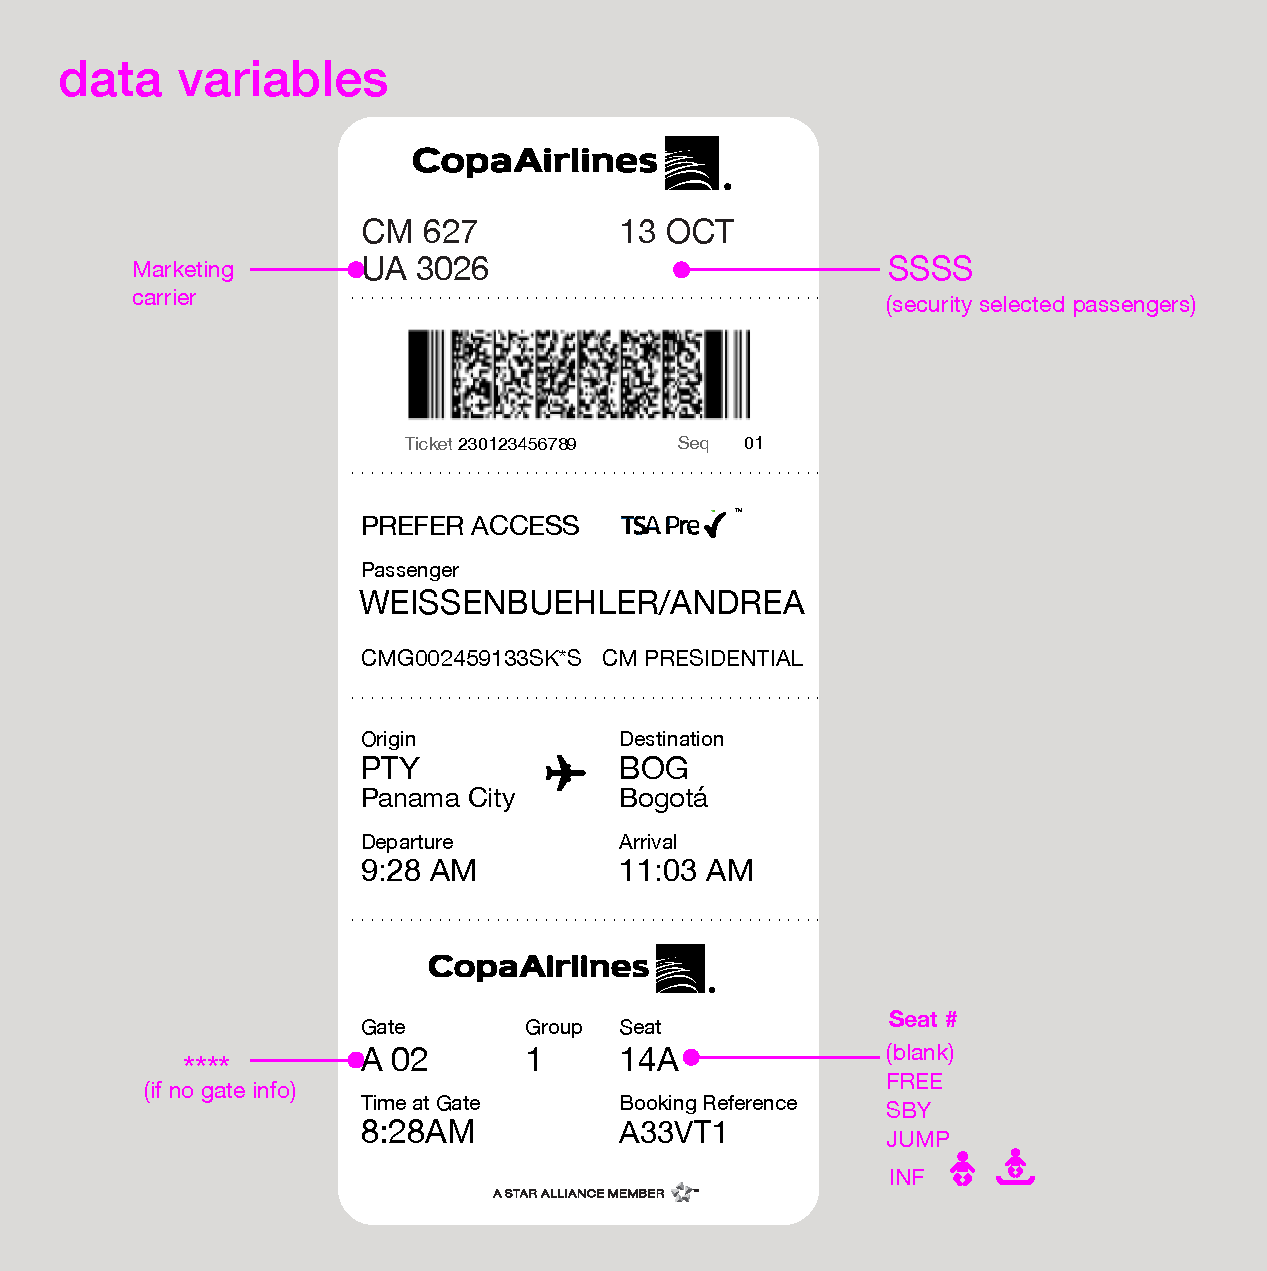 Notes on data points on boarding pass